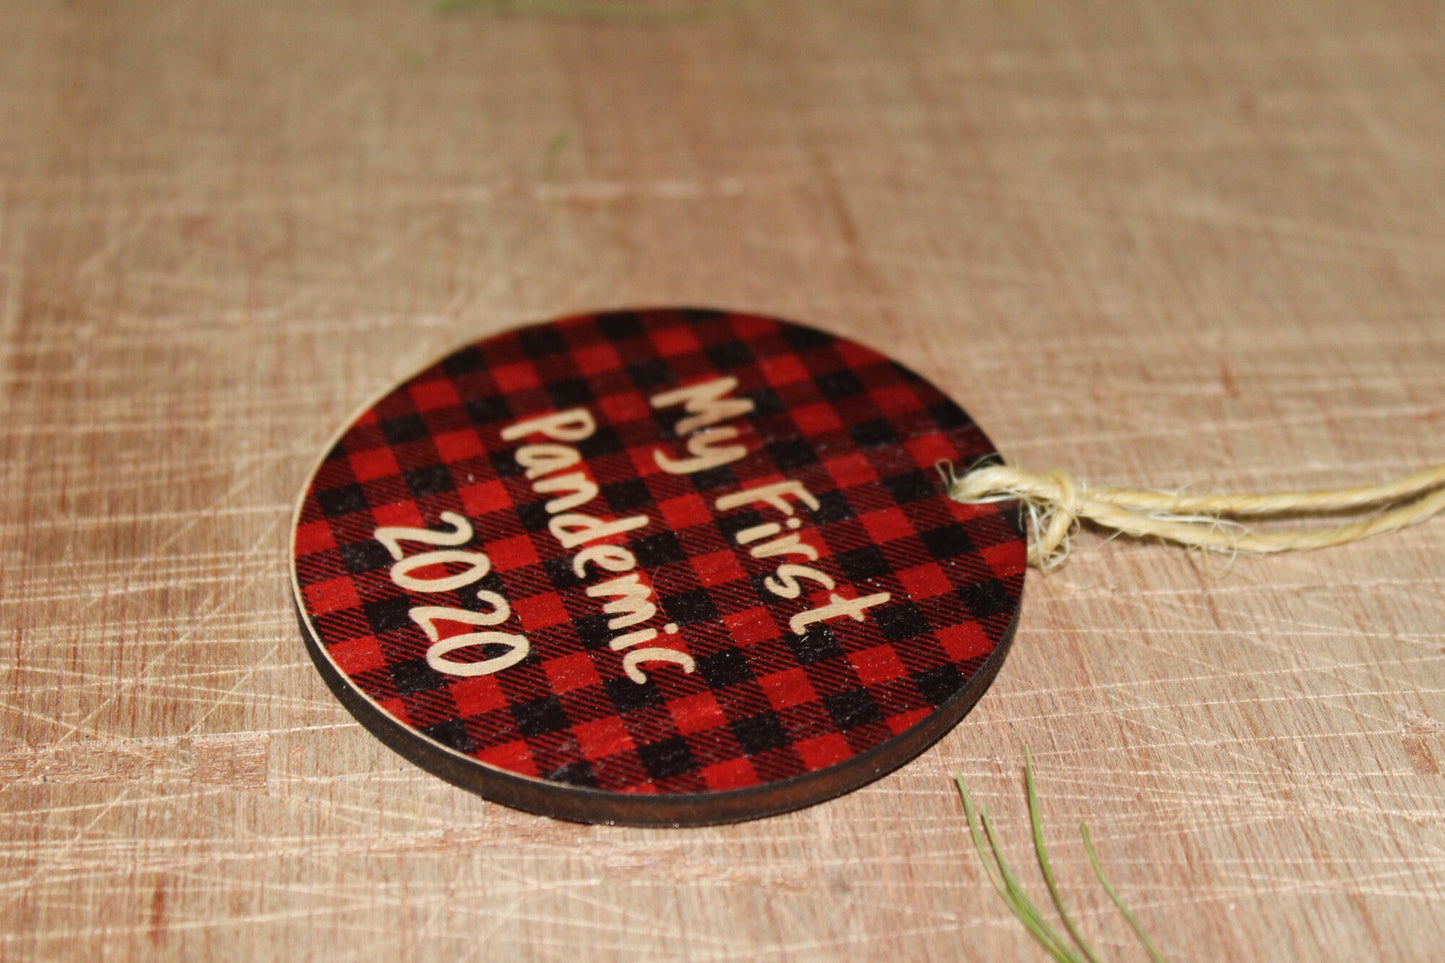 My First Pandemic 2020 Ornament Wood Slice Red Buffalo Plaid Christmas Tree Primitive Rustic Tree Printed Silly Covid